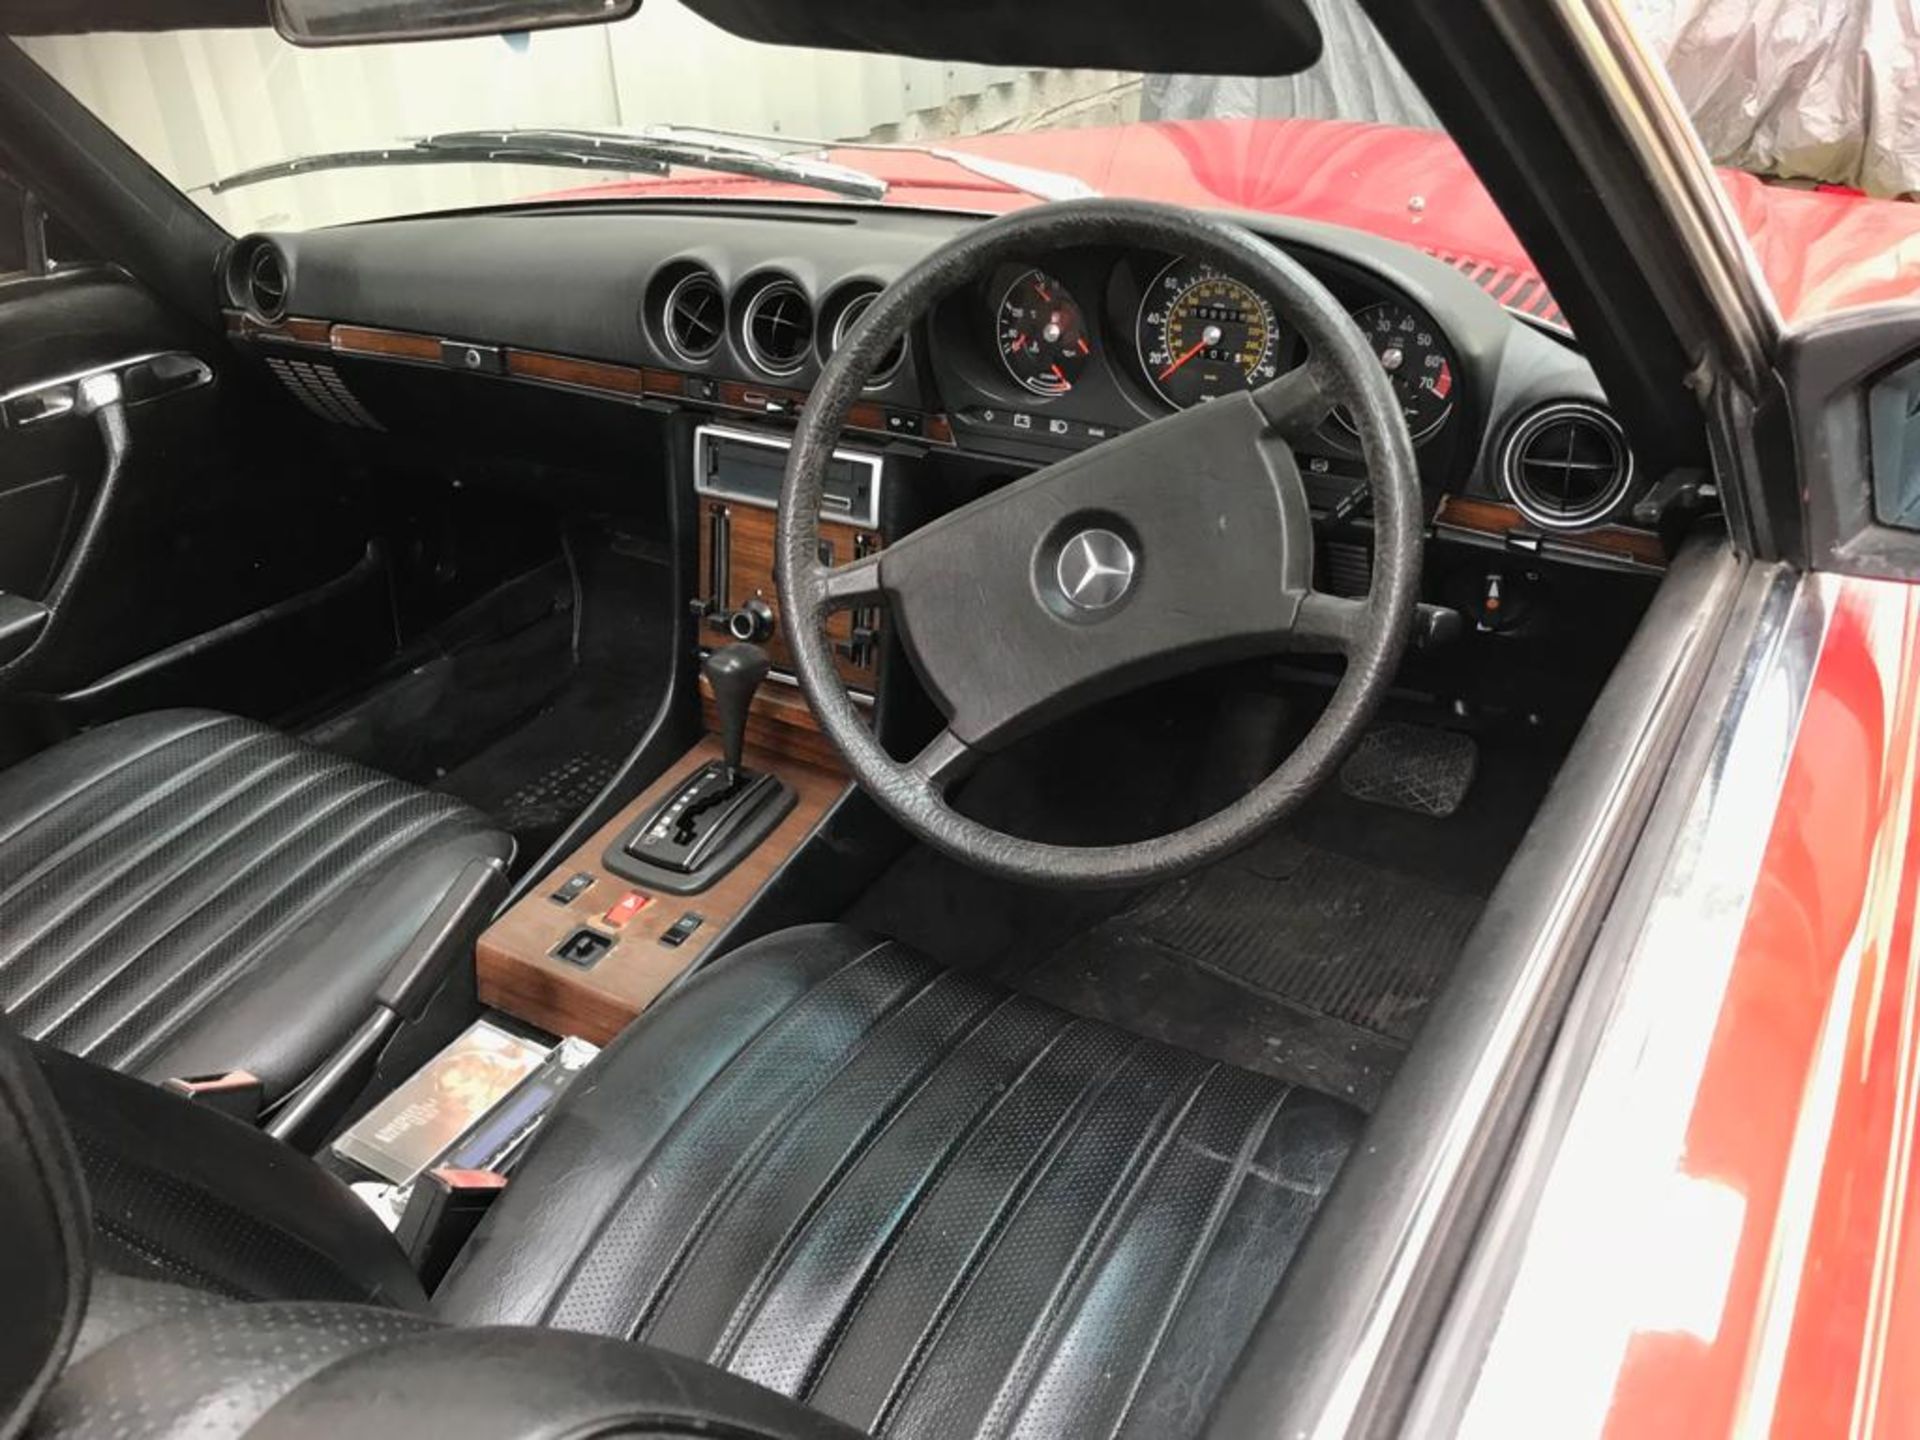 Mercedes 500SL R107 - 69,938 Miles - CL331 - Location: Manchester - No VAT on the hammer! This 500SL - Image 11 of 11